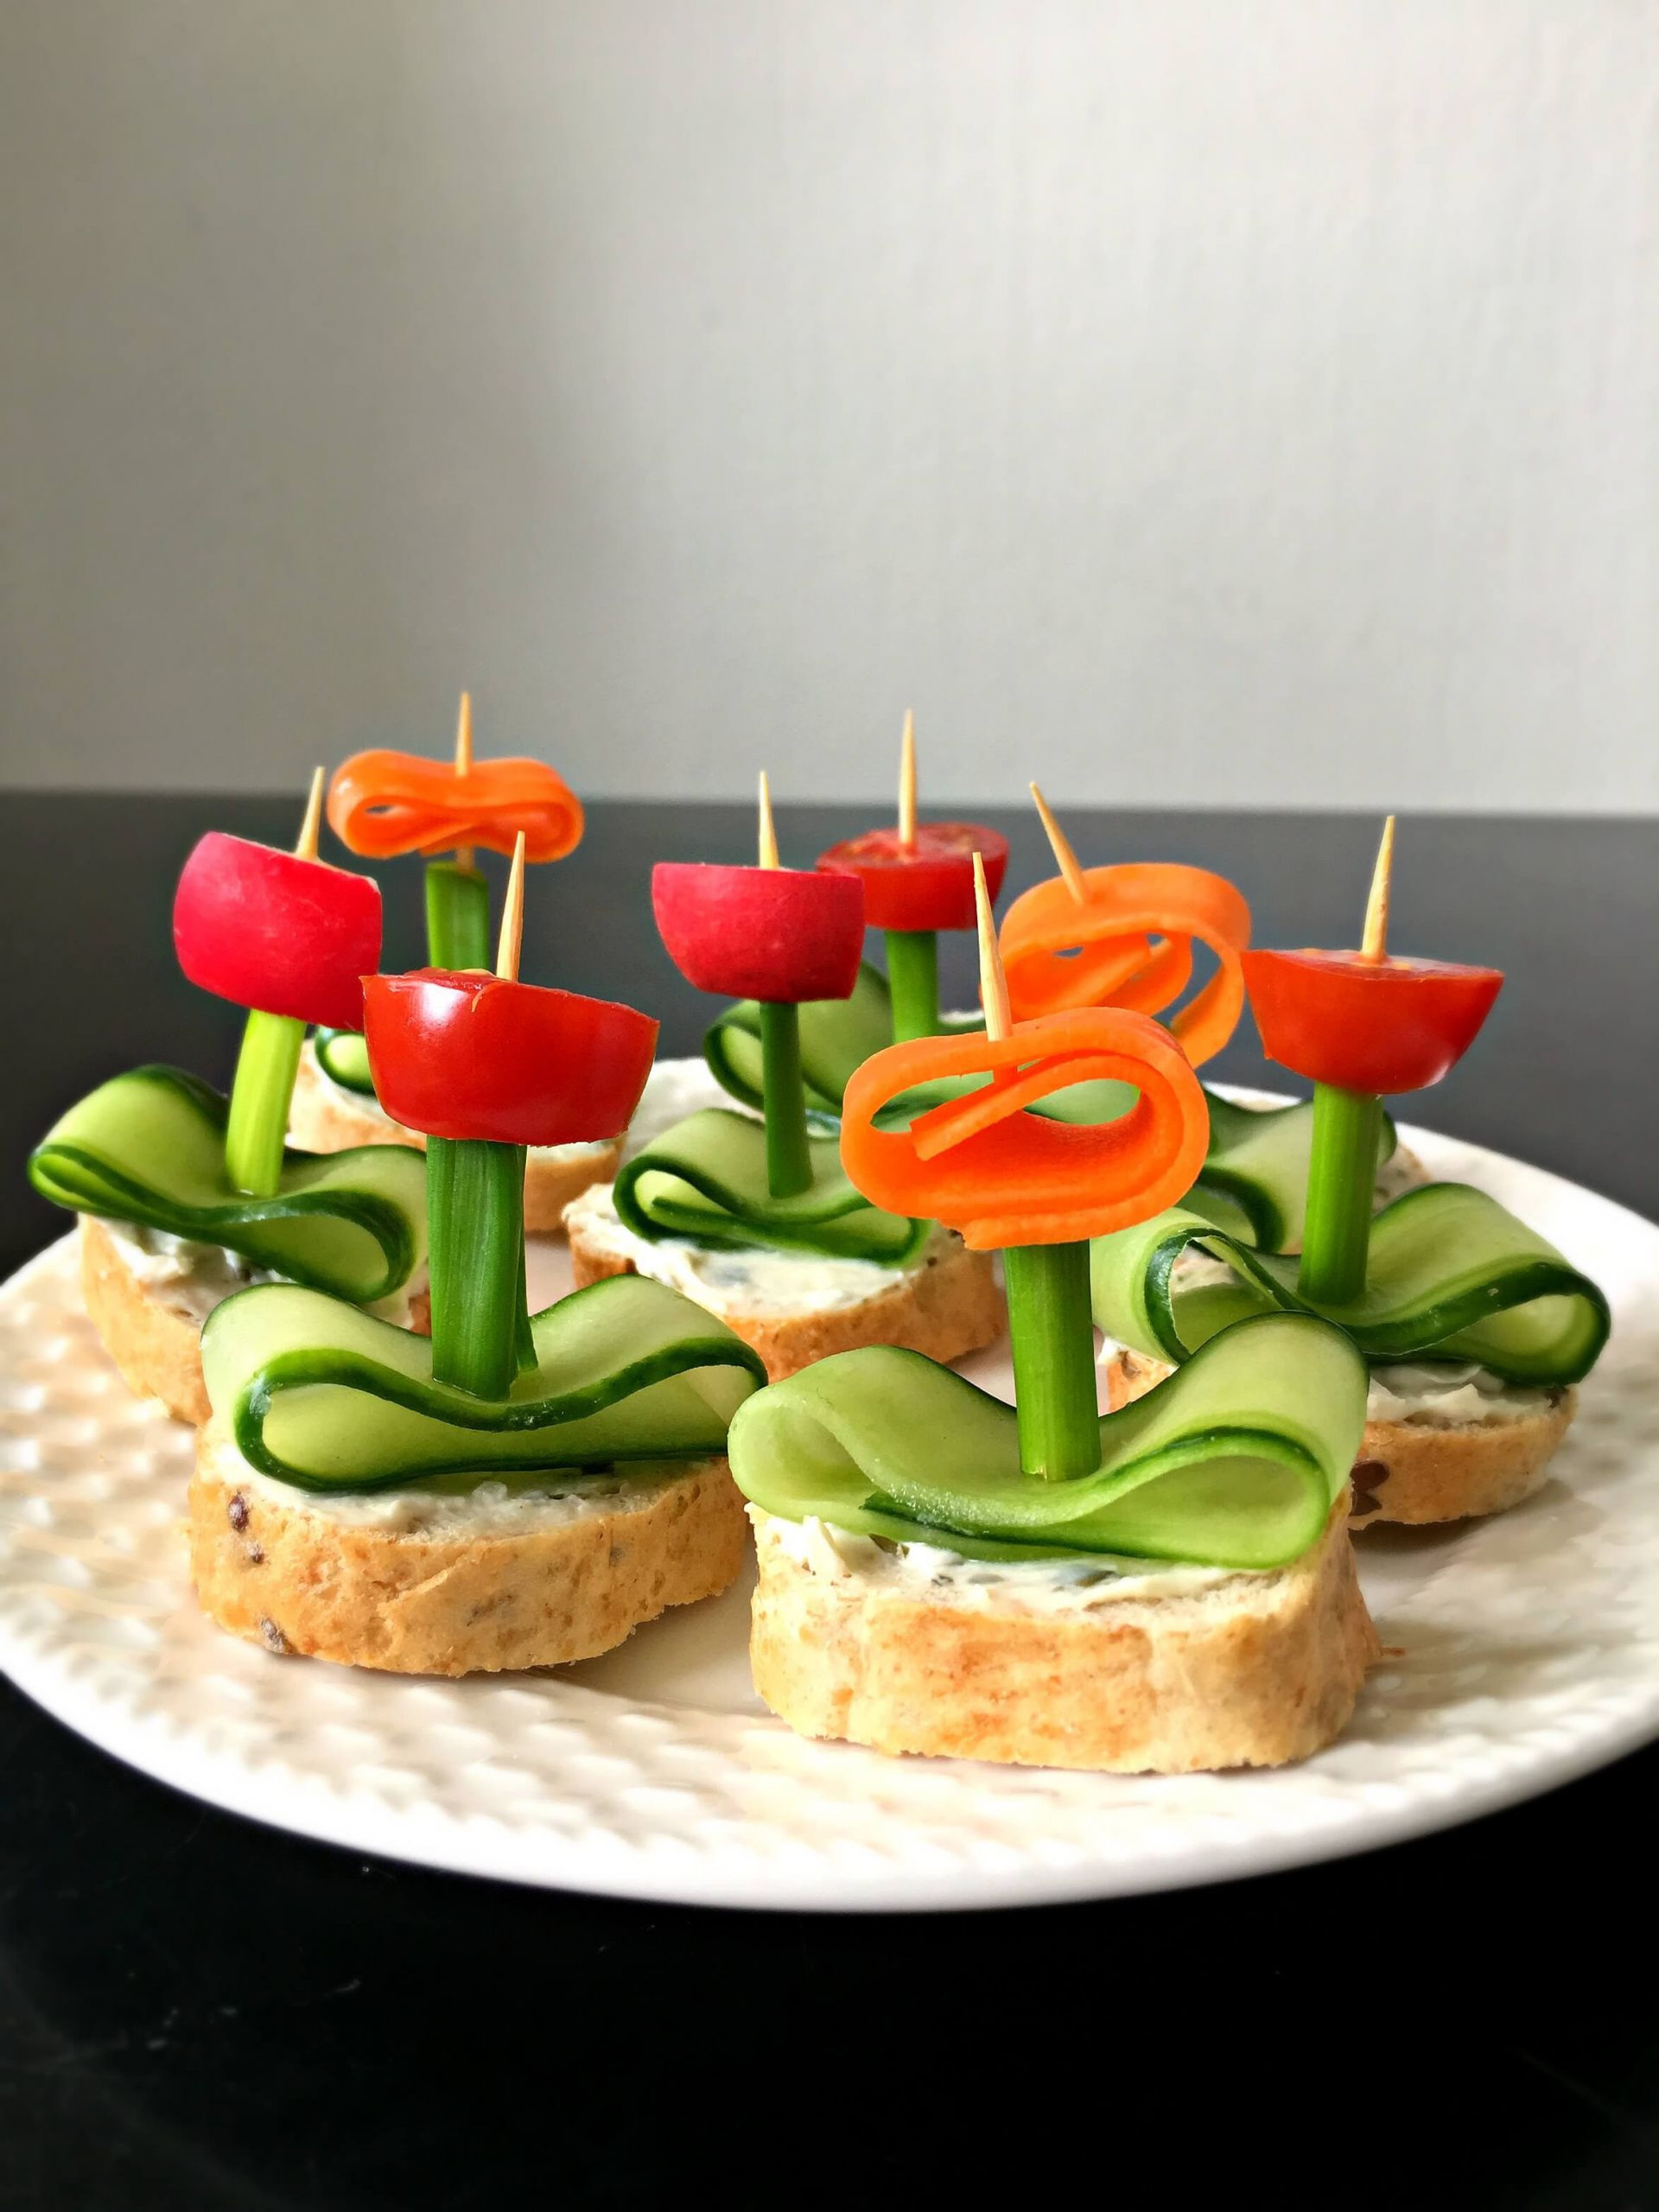 Vegetarian Appetizers Finger Food
 Vegan Flower Appetizers with Herb "Cream Cheese"